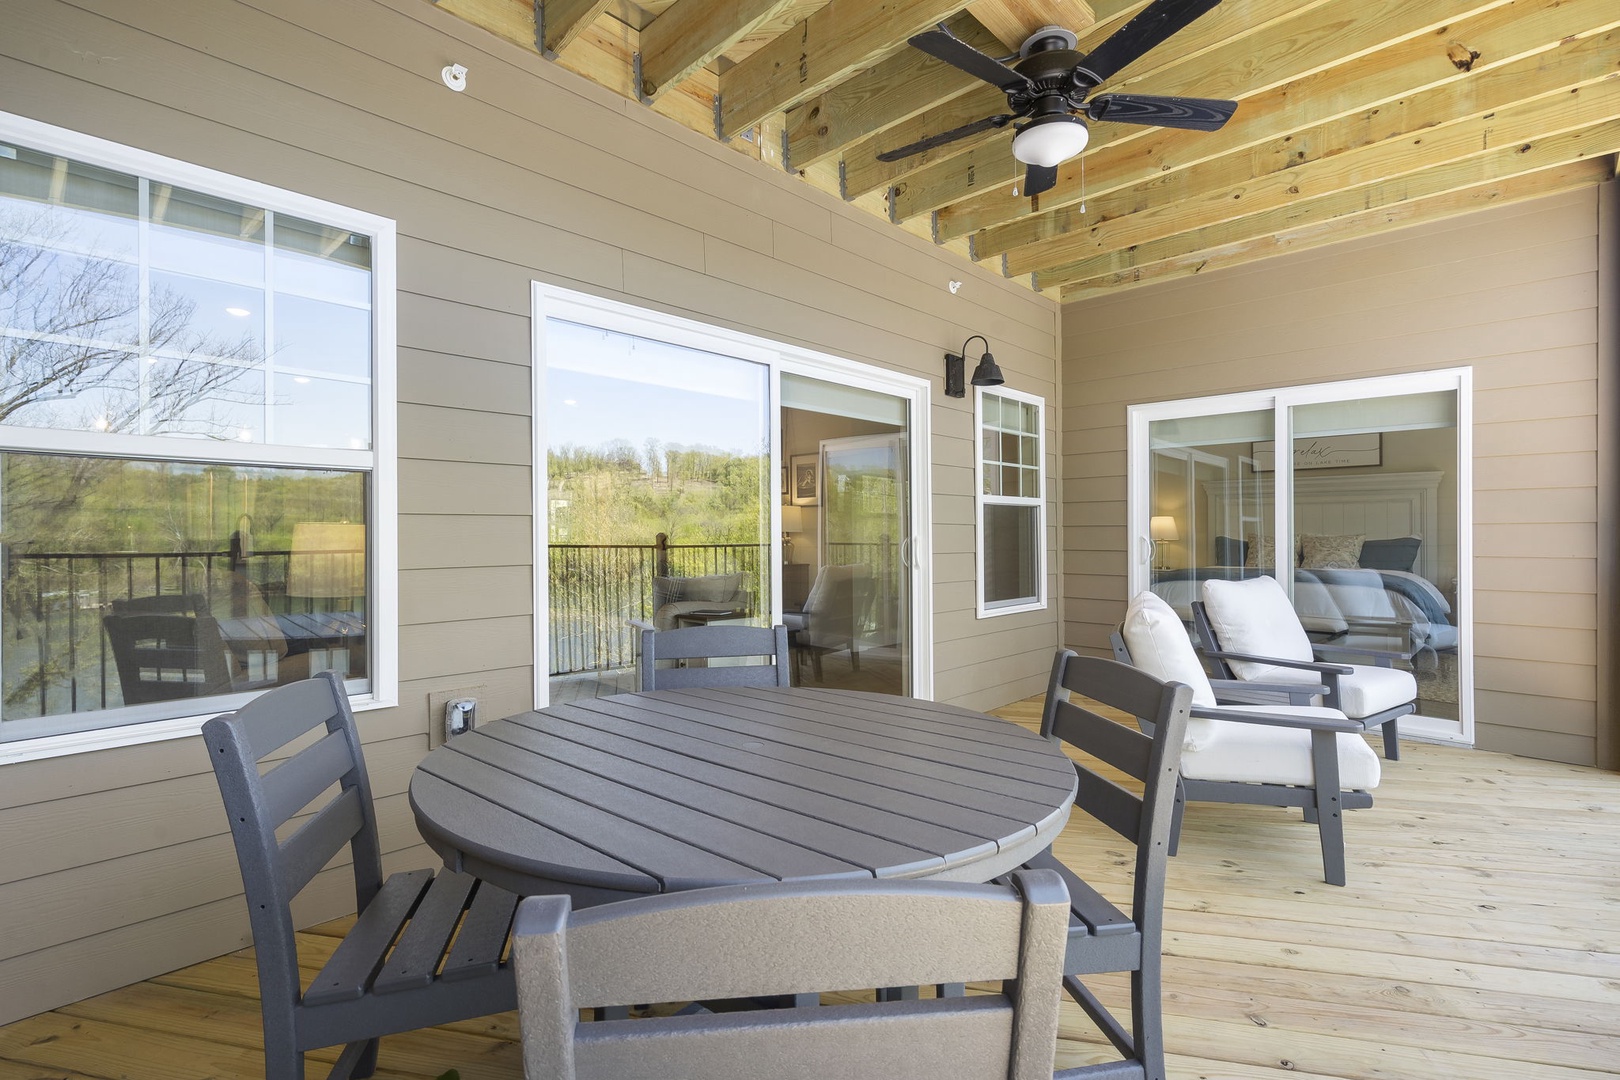 The covered back deck offers Outdoor Dining seating for 4 as well as extra spaces to lounge